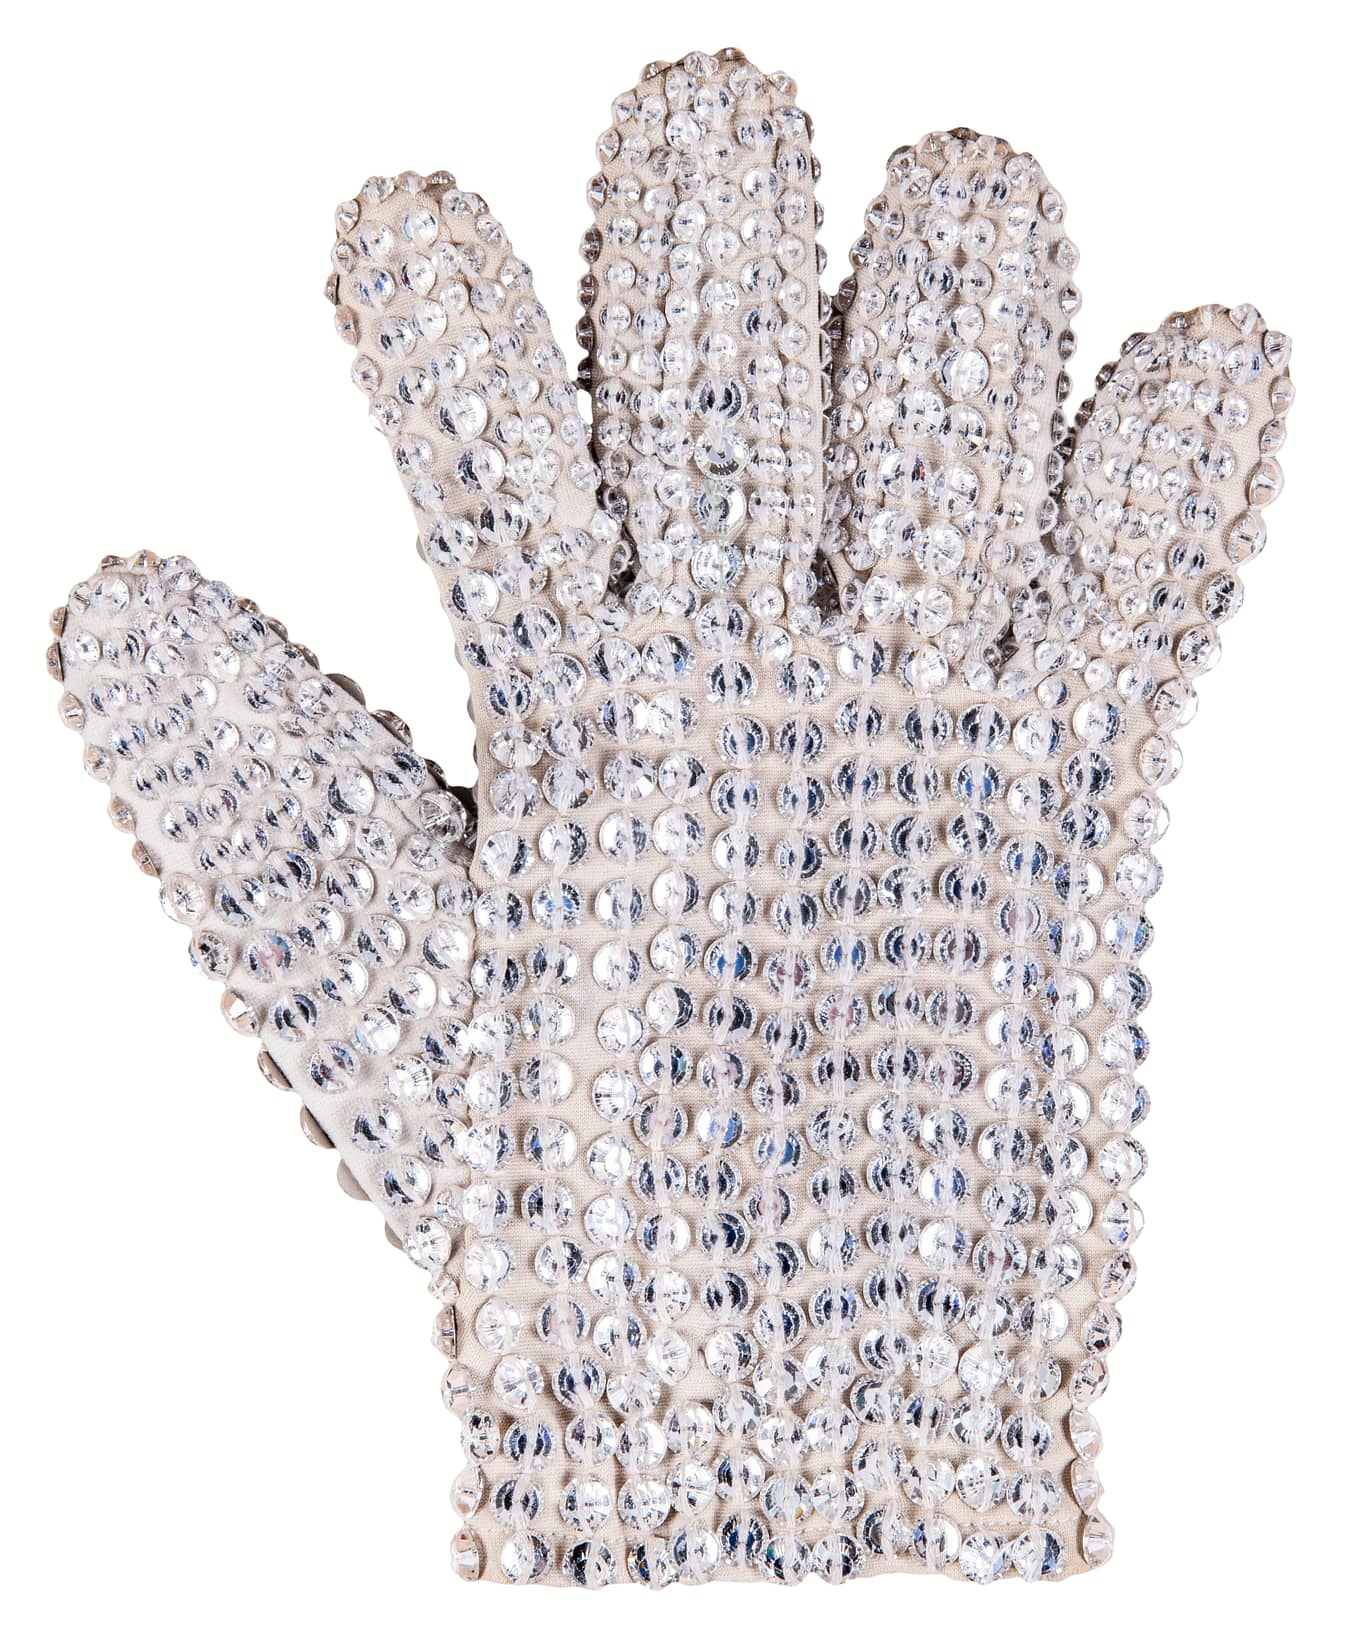 HOT Michael Jackson Style White Glove with Brilliant Crystal